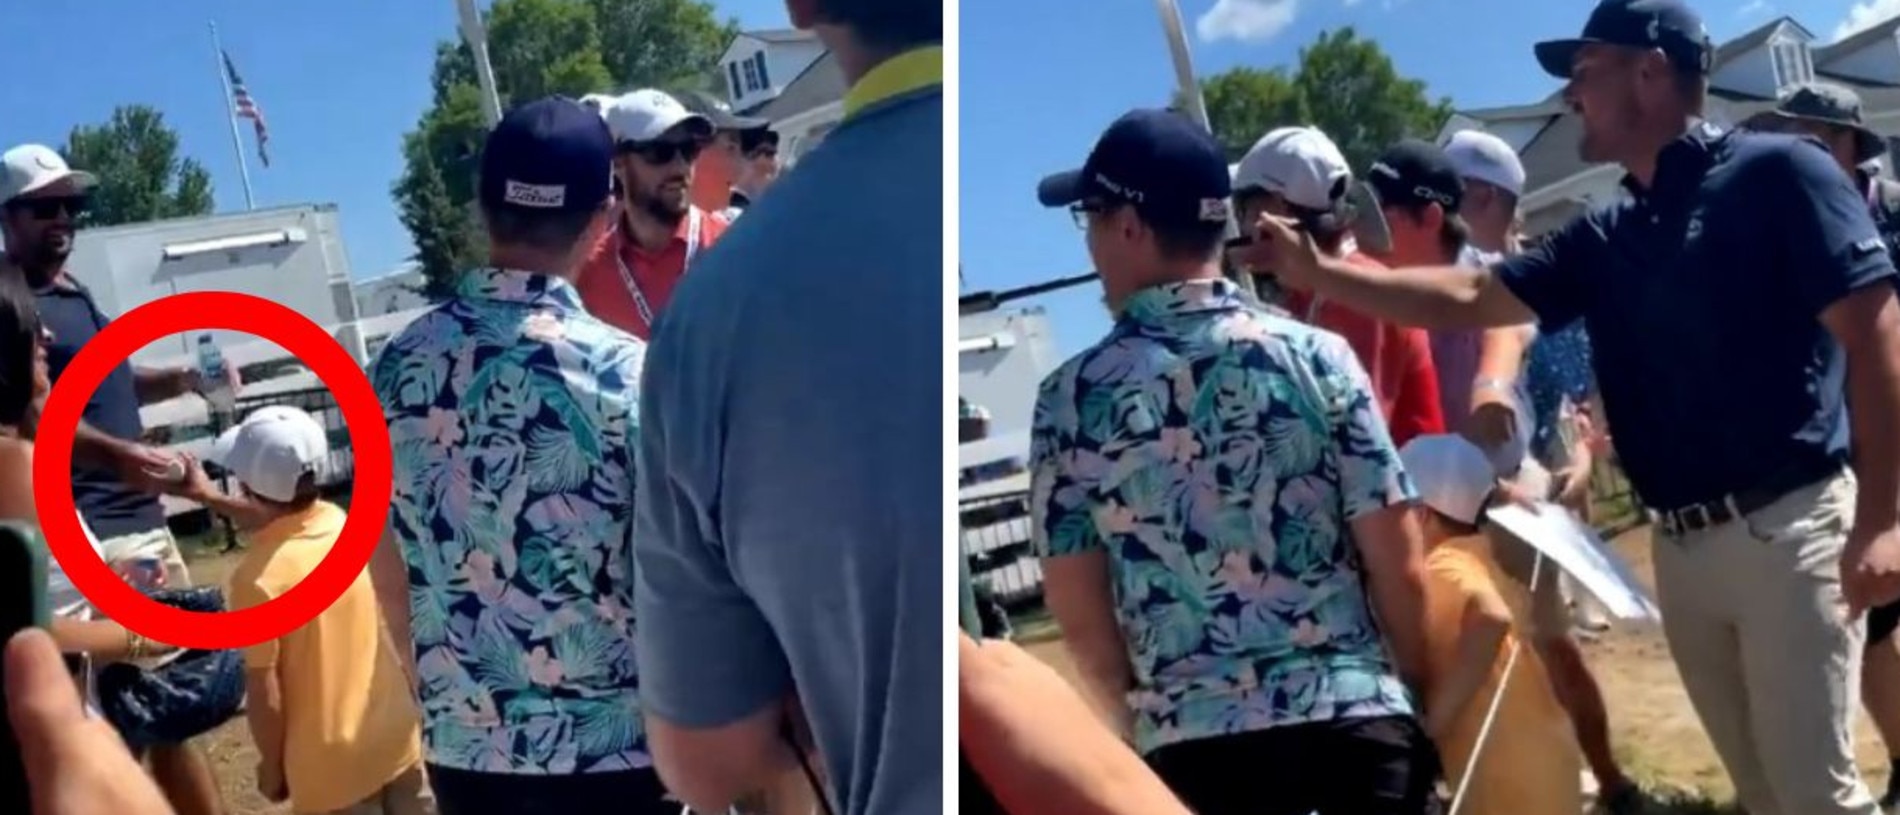 Bryson DeChambeau got the fan to give the ball back to the kid.